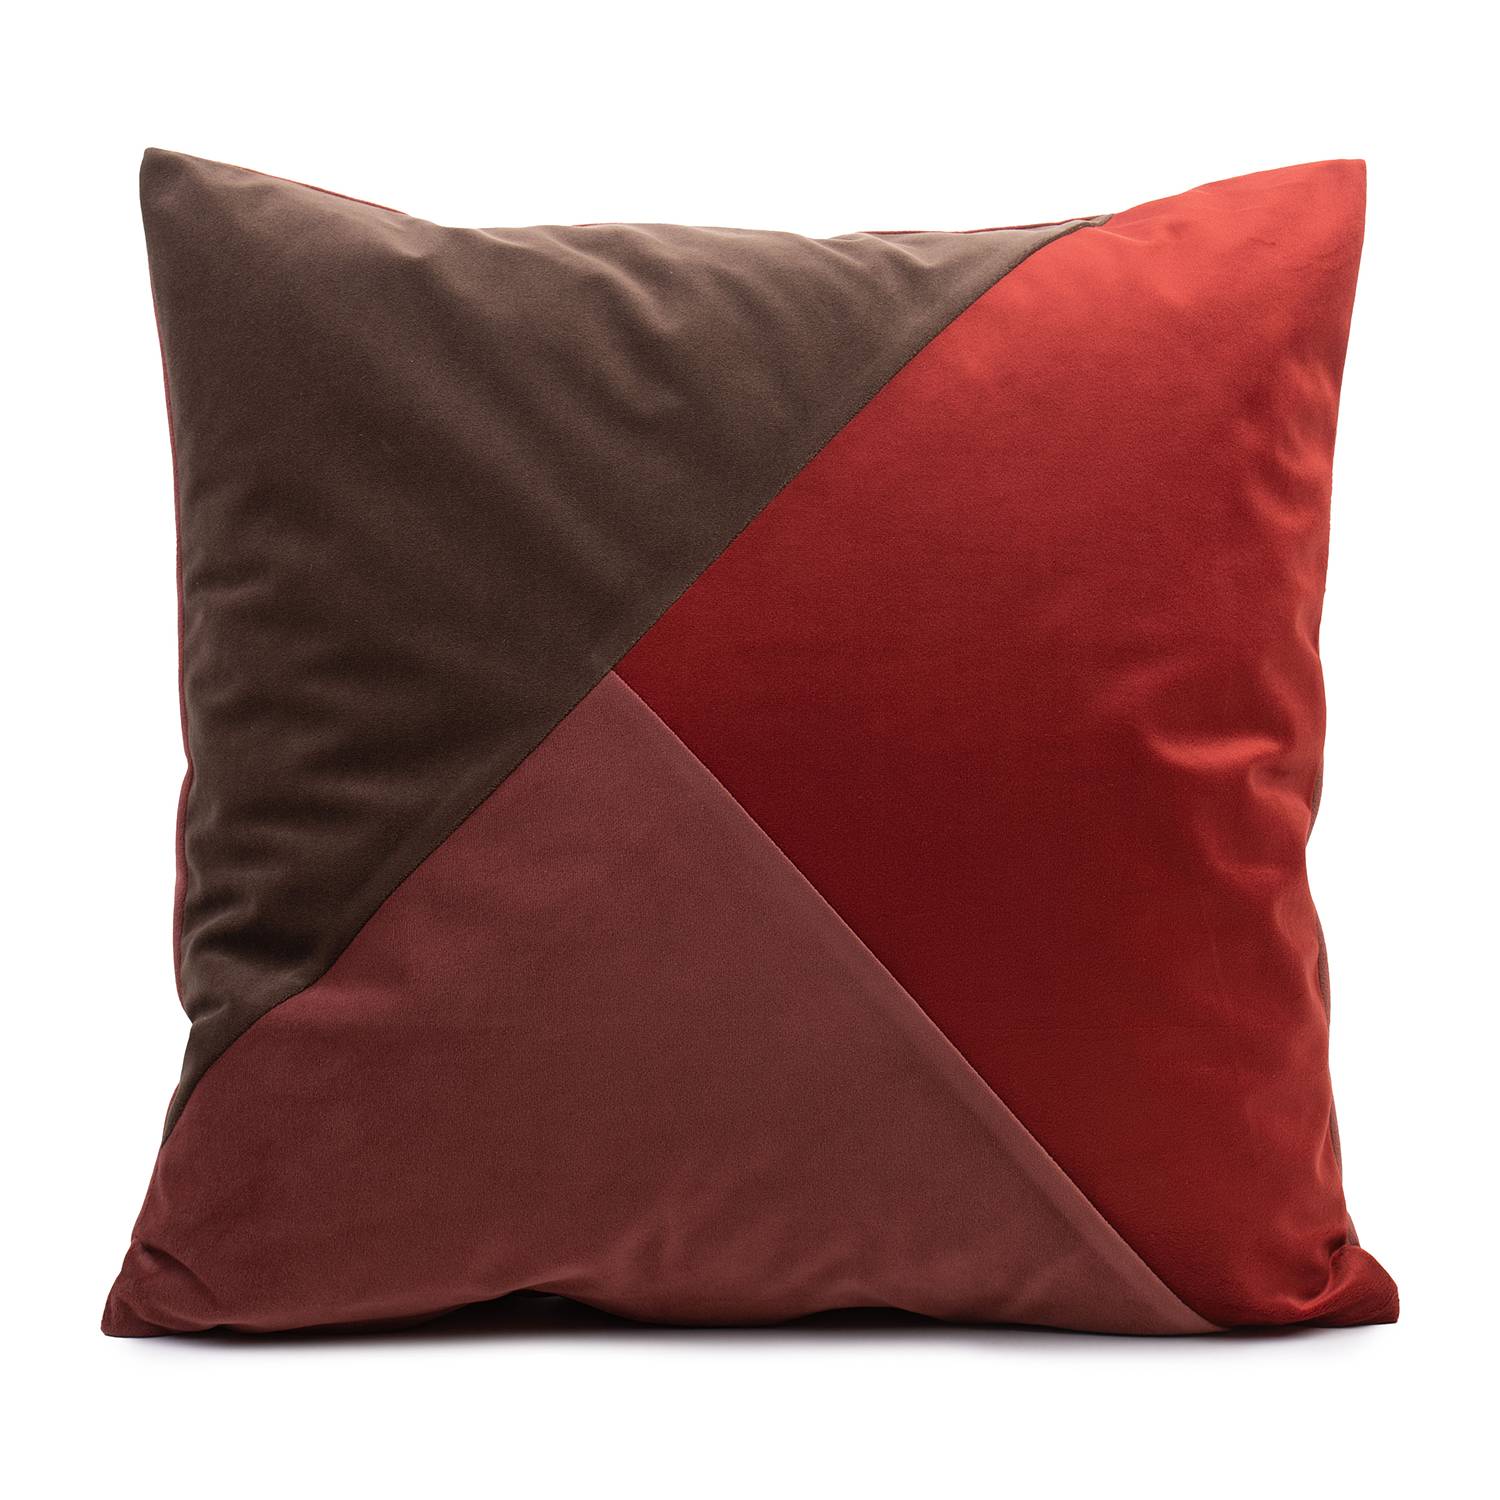 Image of Housse de coussin Peppino 000000001000243542